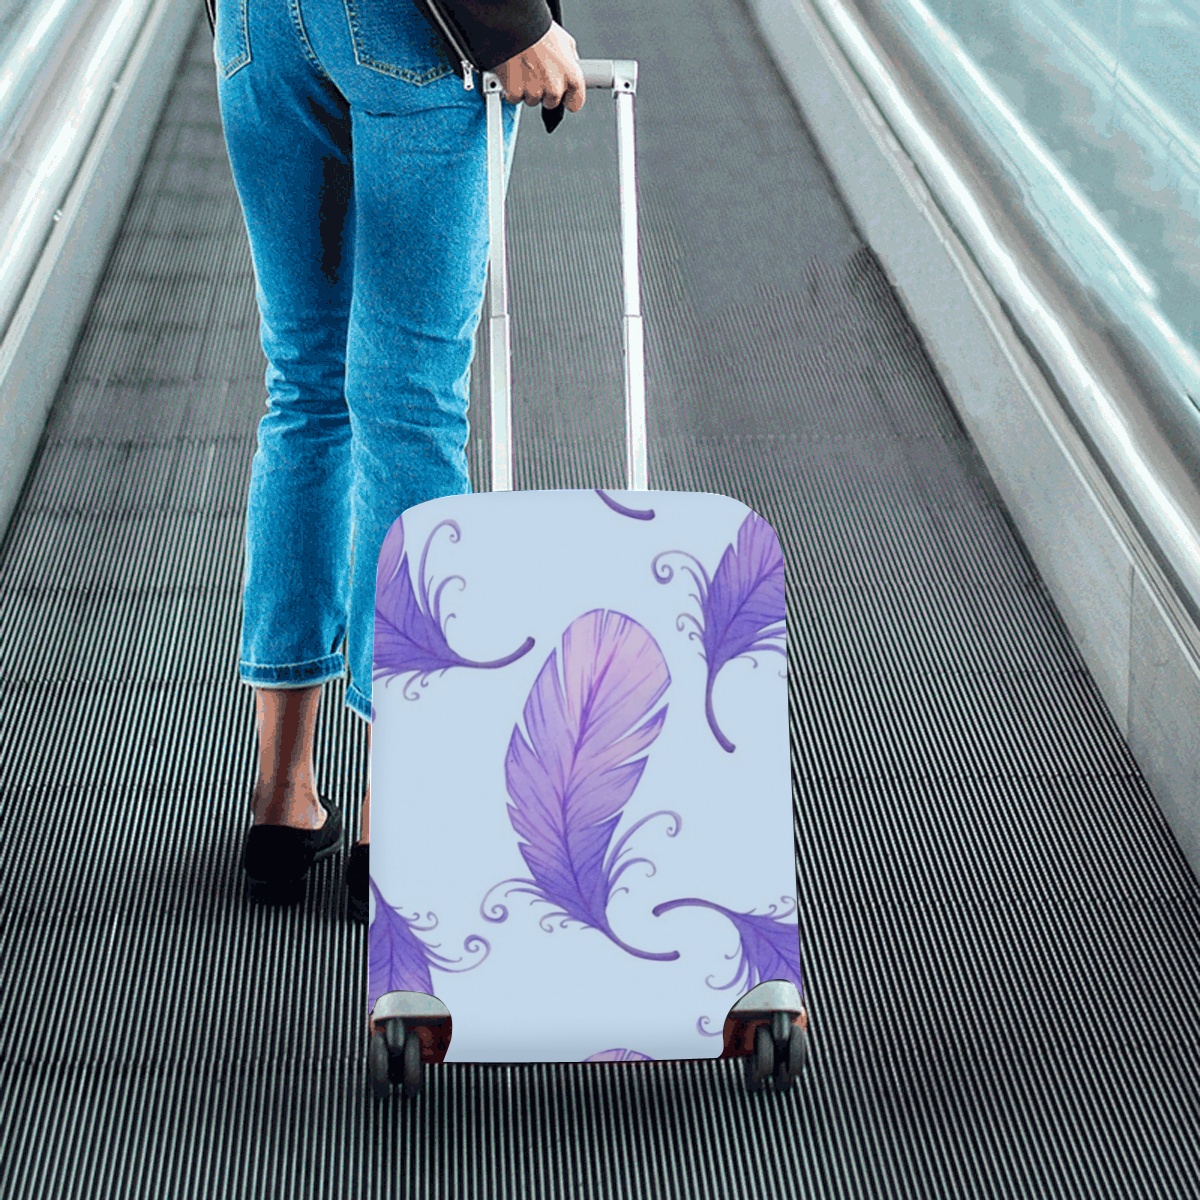 Purple Feathers Luggage Cover Luggage Cover/Small 18"-21"